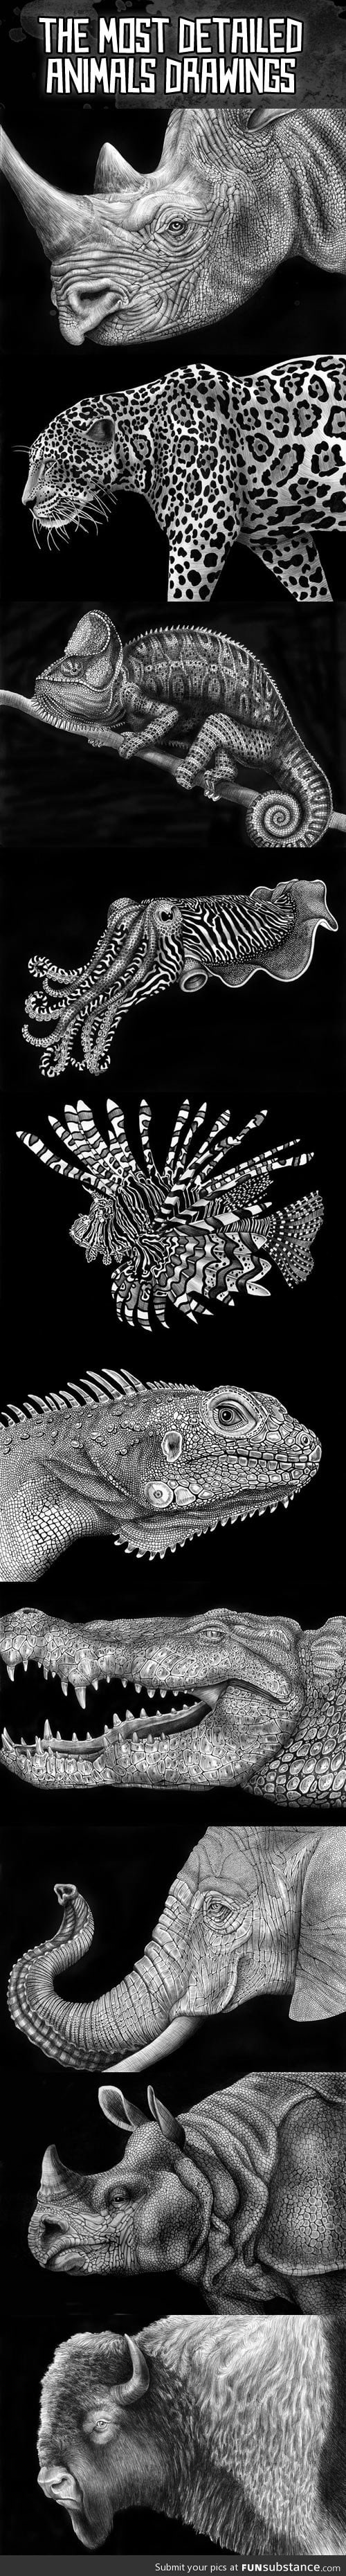 The most detailed animal drawings…